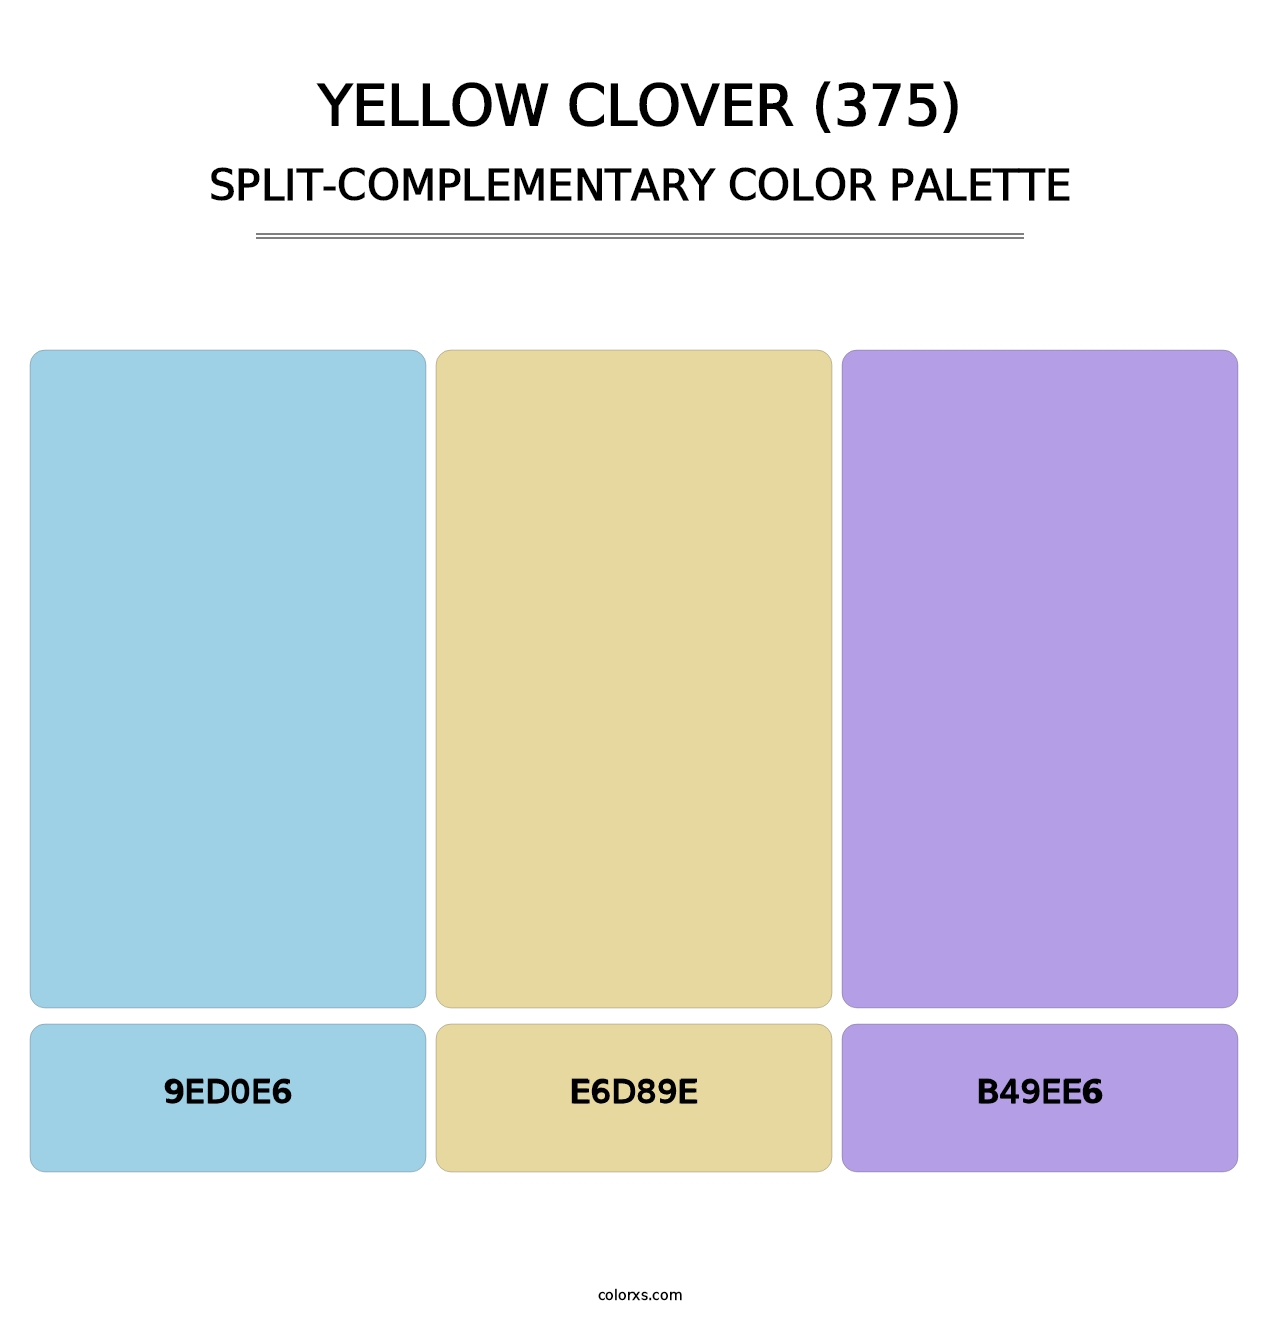 Yellow Clover (375) - Split-Complementary Color Palette